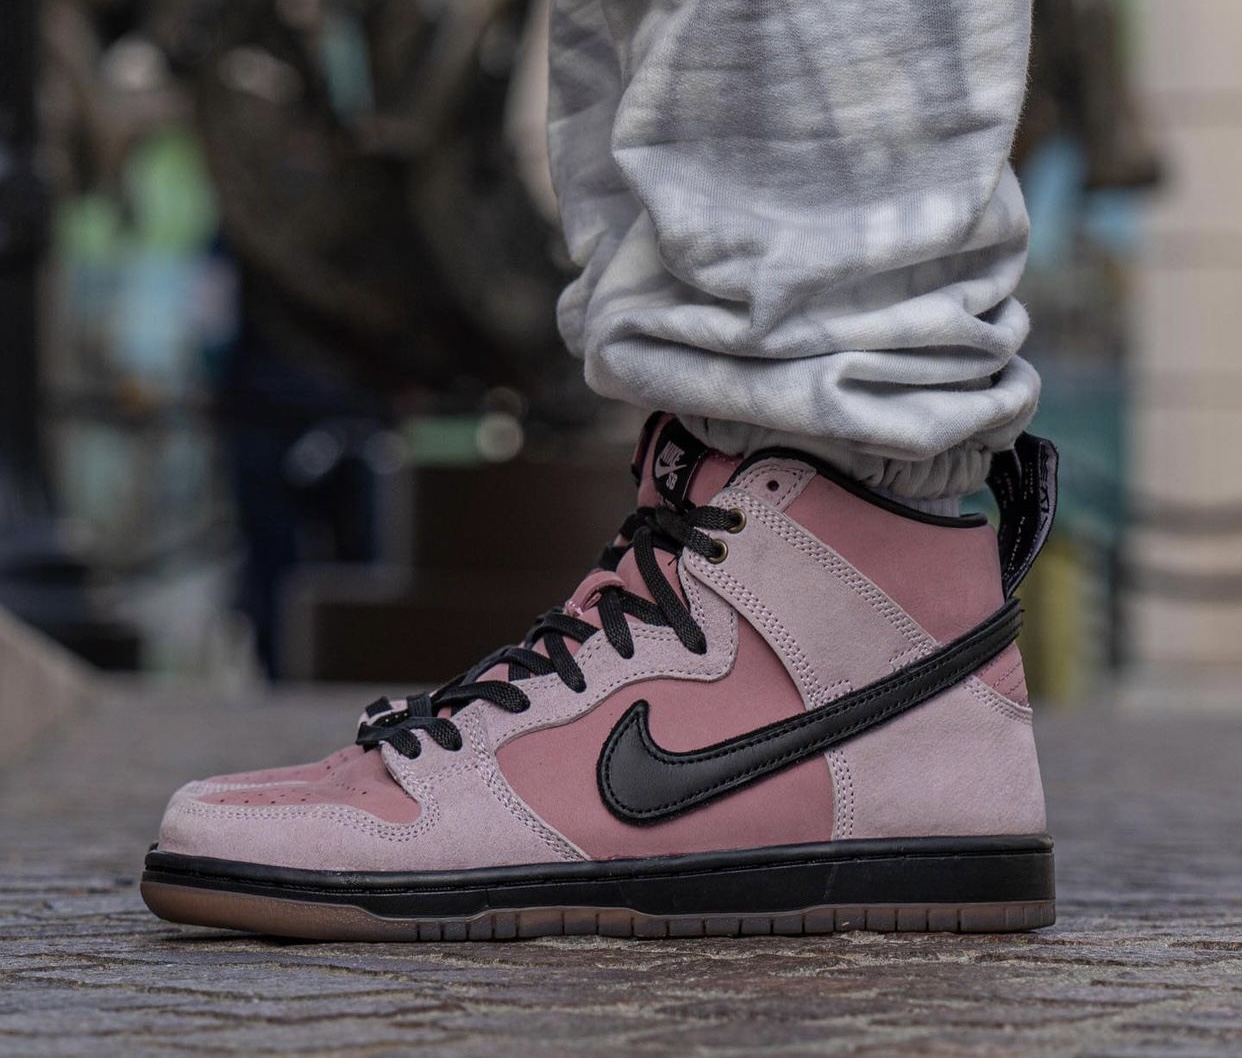 KCDC x Nike SB Dunk High DH7742-600 Release Date - SBD